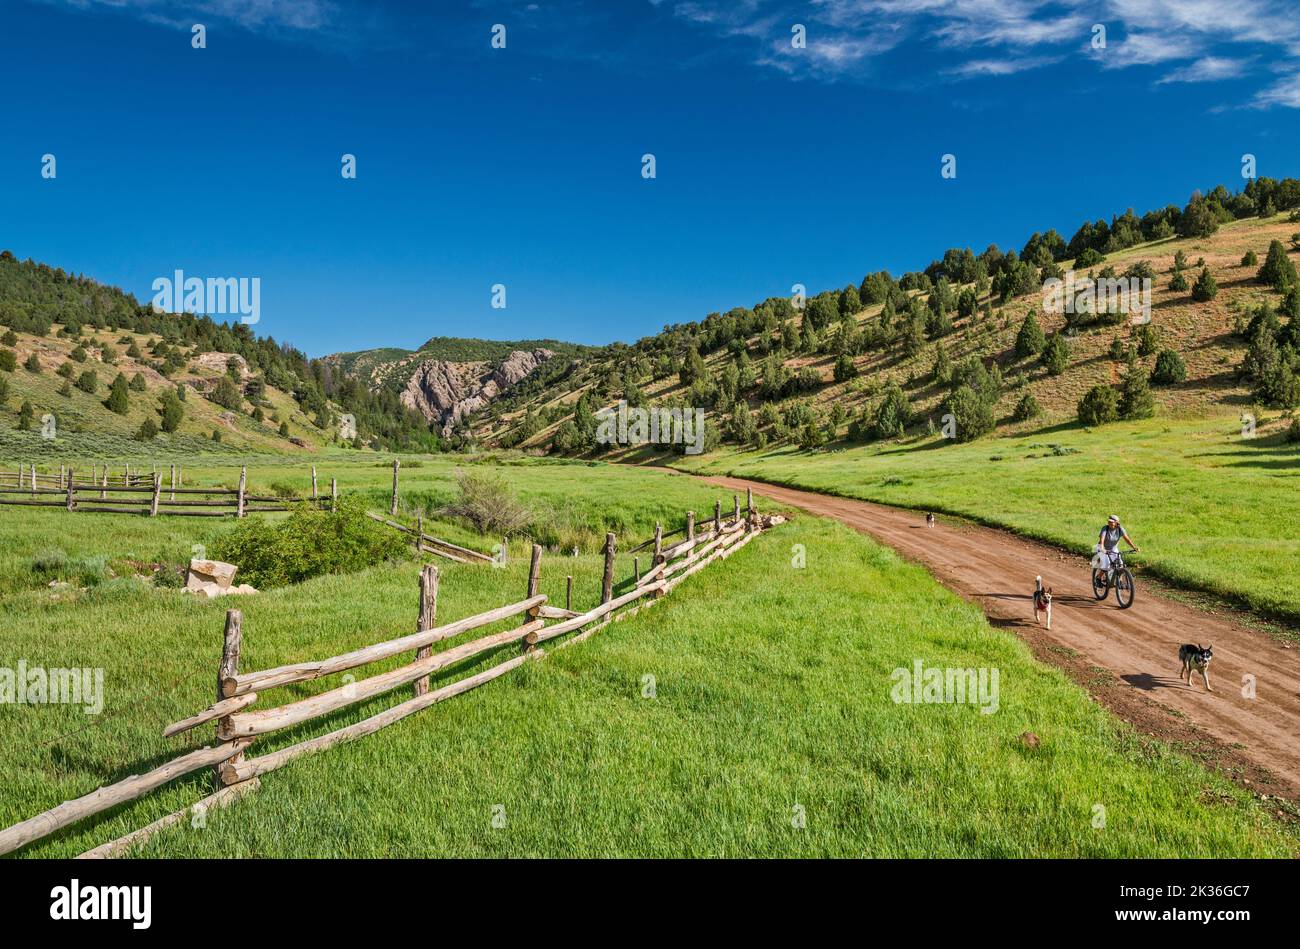 Young woman biking with her three dogs, Rees Valley, Chicken Creek Road, FR 101, San Pitch Mountains, Uinta National Forest, Utah, USA Stock Photo